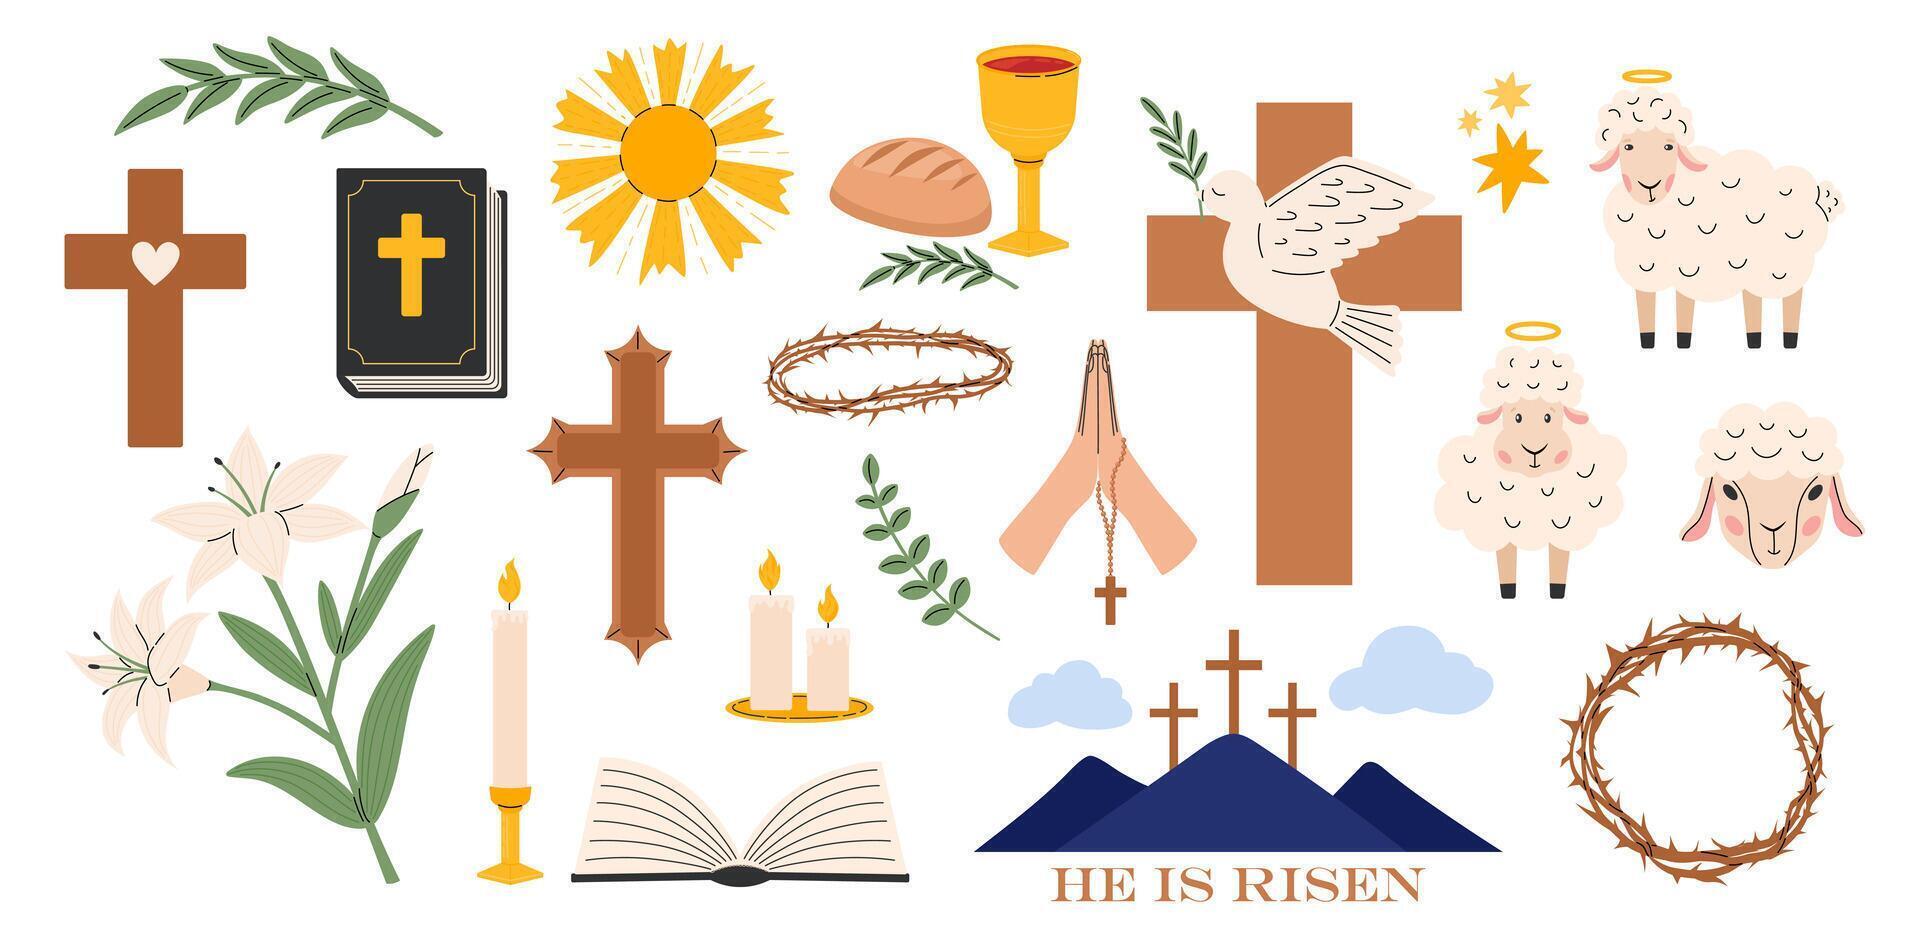 Easter sticker pack. Religious christian signs and symbols. Bible, hands holding cross, dove with branch, cross of Jesus Christ, crown of thorns, bowl and bread, sheep. Holy Week. Vector illustration